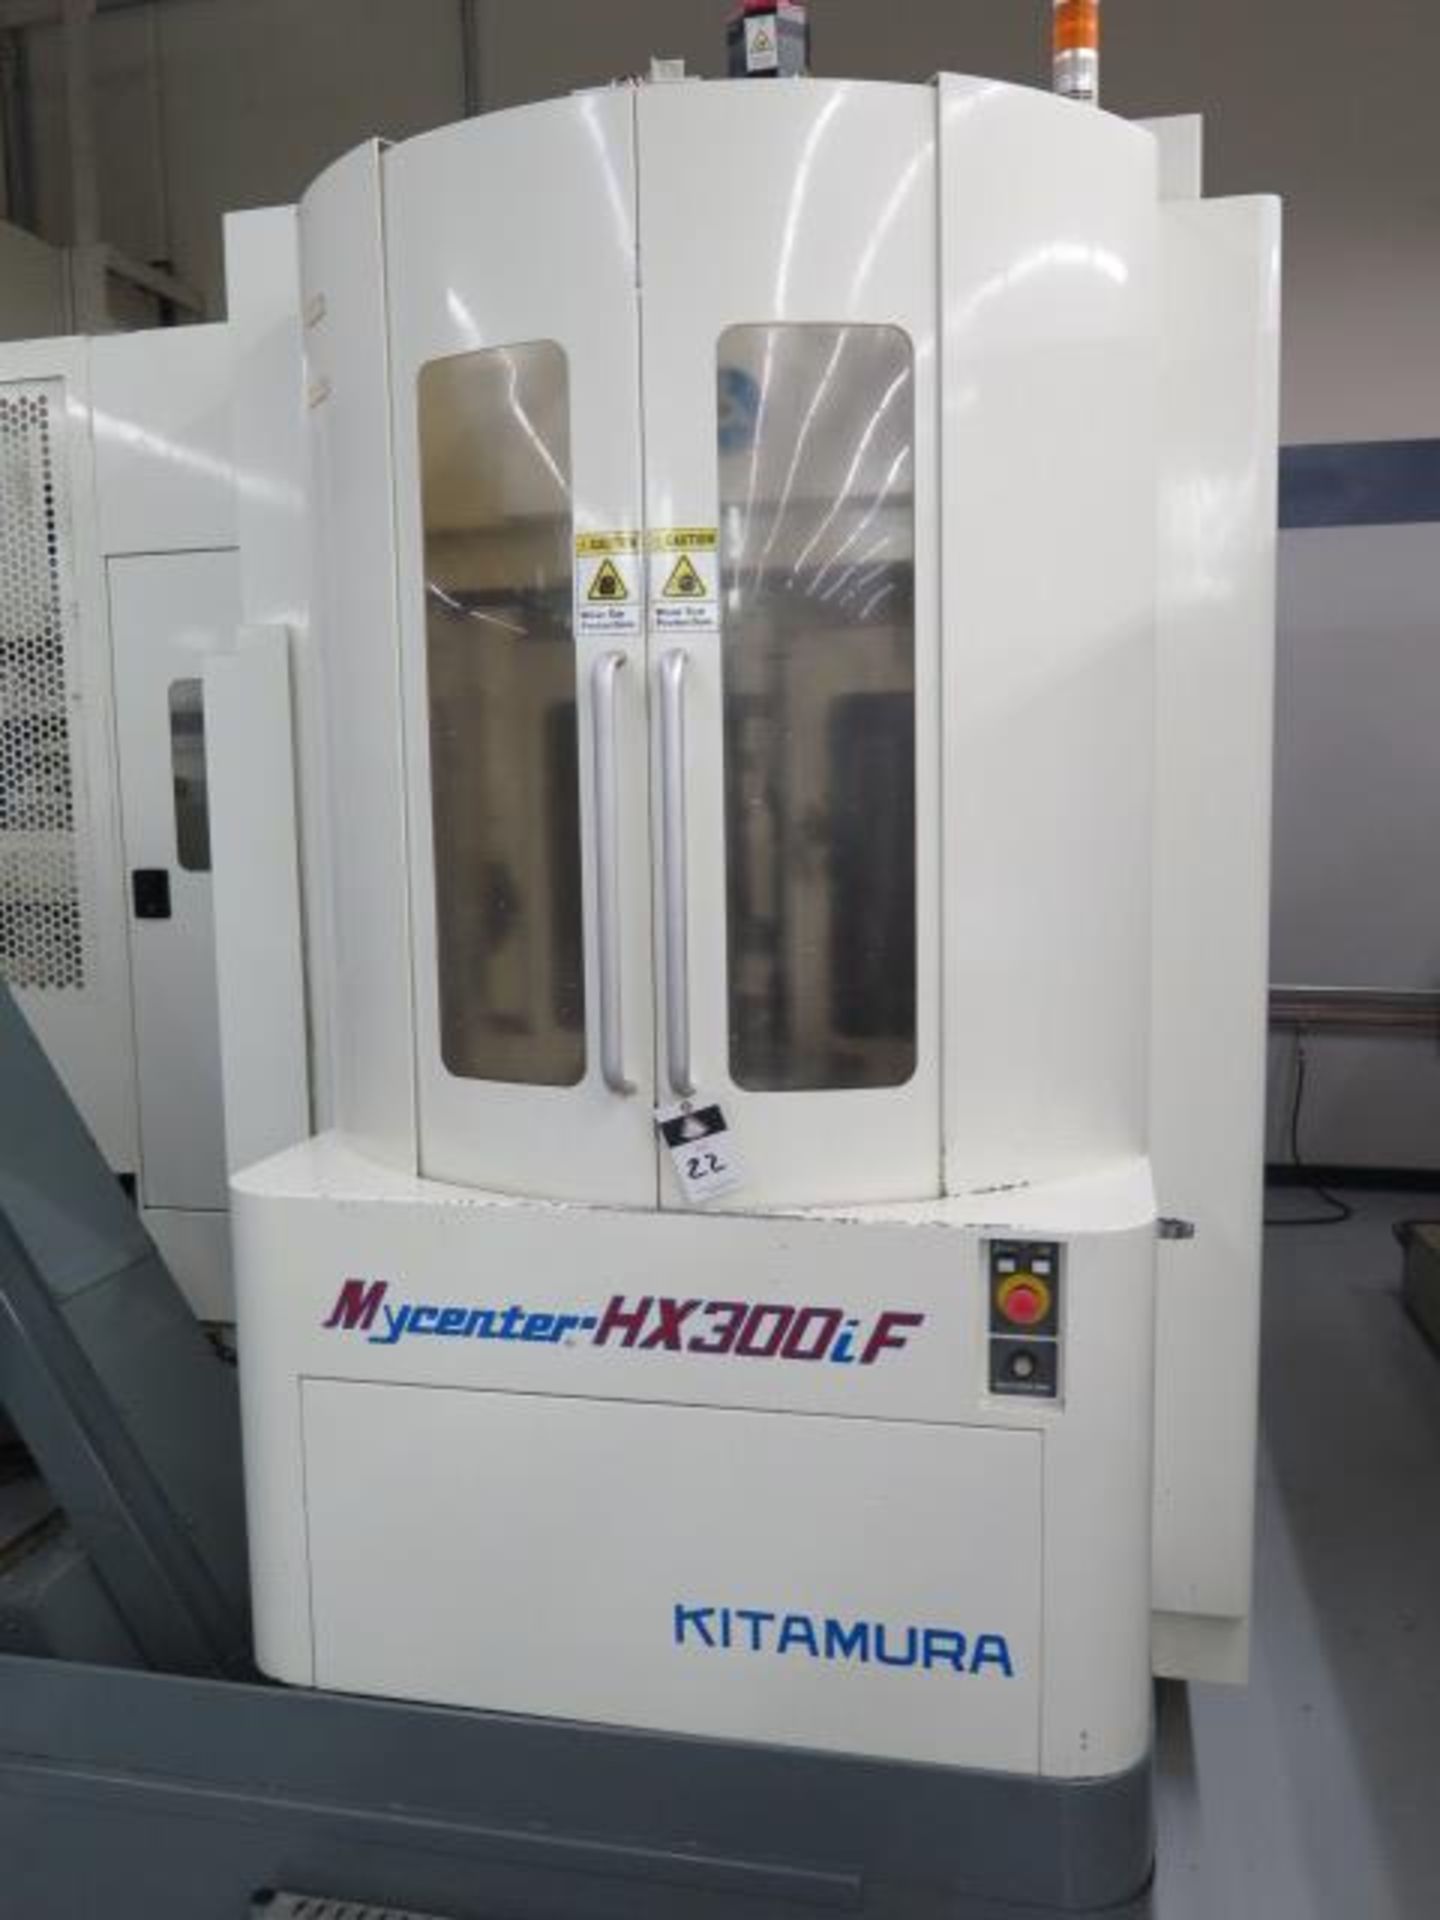 Kitamura Mycenter HX300iF 2-Paller 4-Axis CNC Horizontal Machining Center s/n 40975 SOLD AS IS - Image 14 of 26